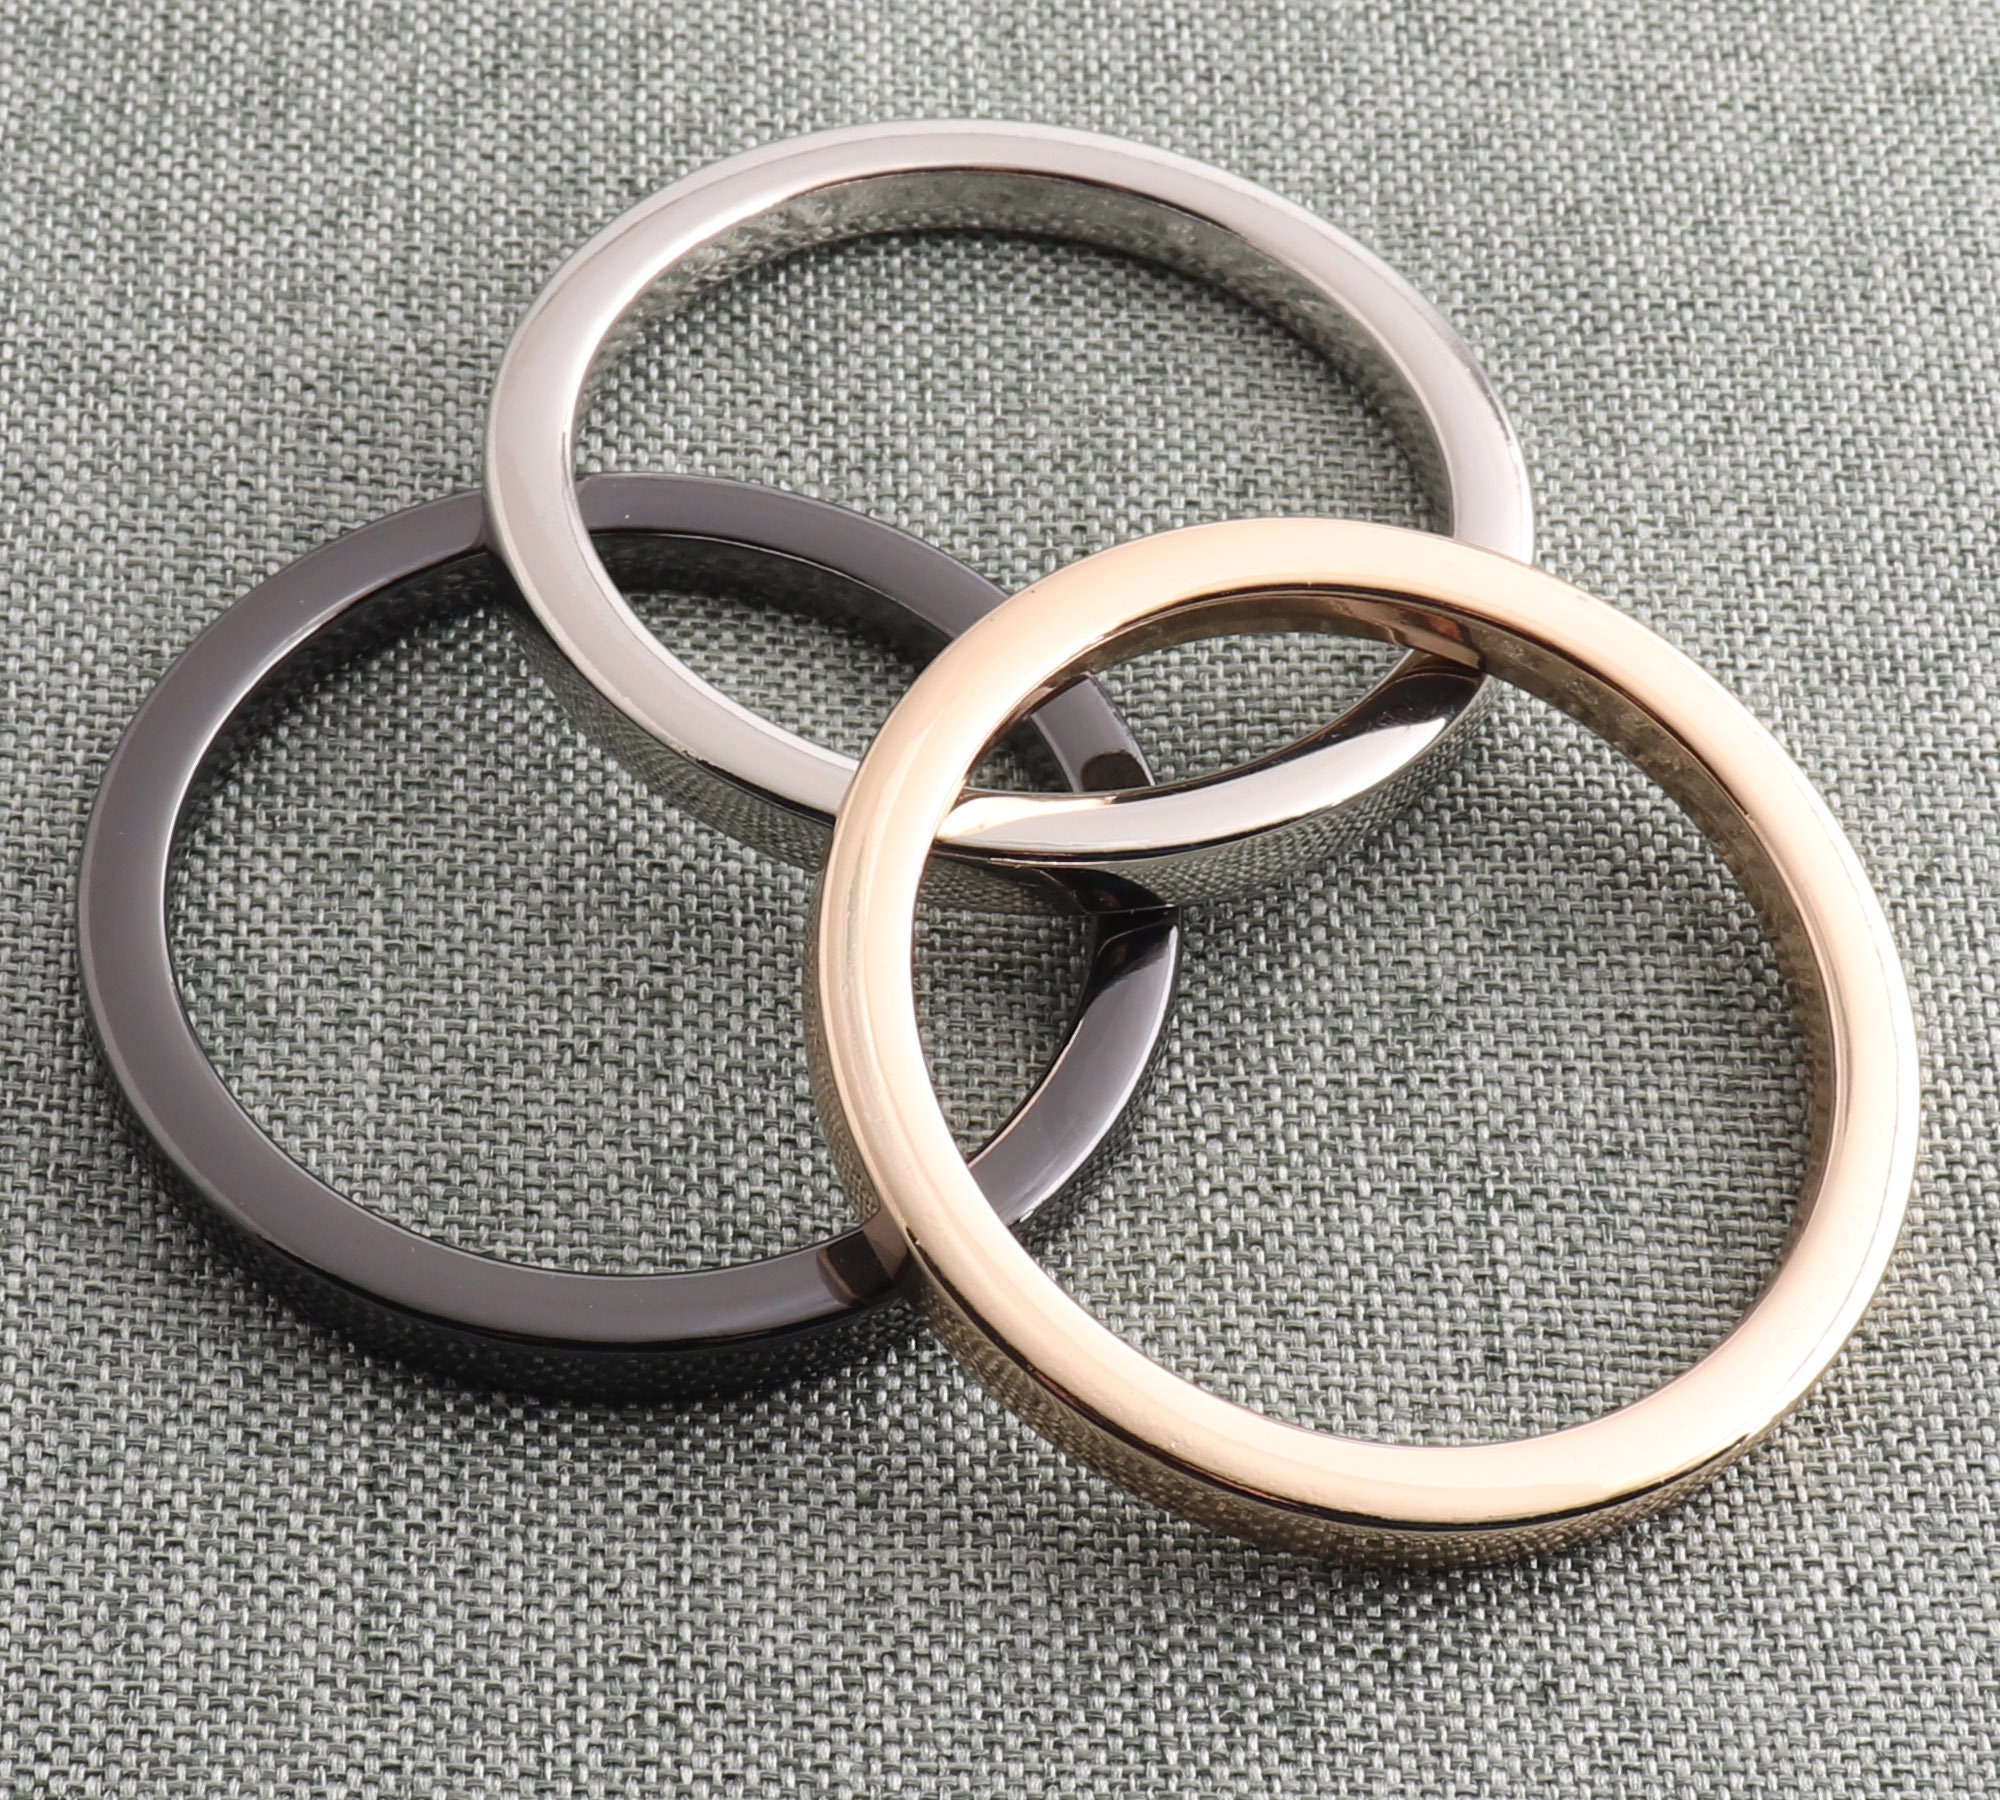 Metal O Rings - Available in many sizes from stock : Barnwell